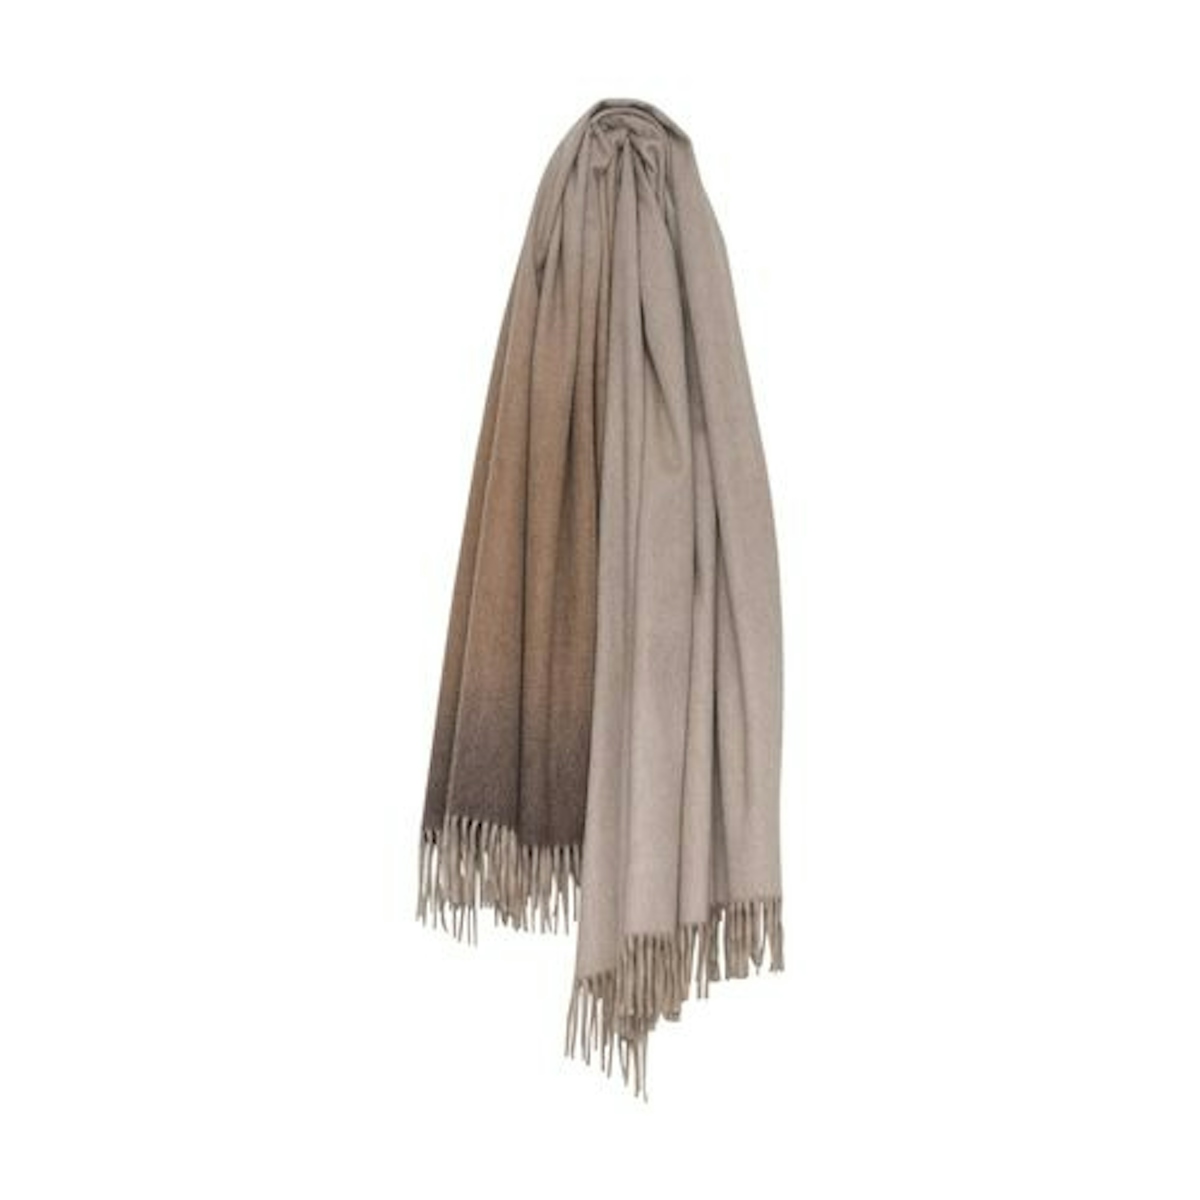 Caramel Coast Nuance Ombre Throw - 9 Best Luxury Throws & Blankets to Buy for your Home - Style Guide - LuxDeco.com